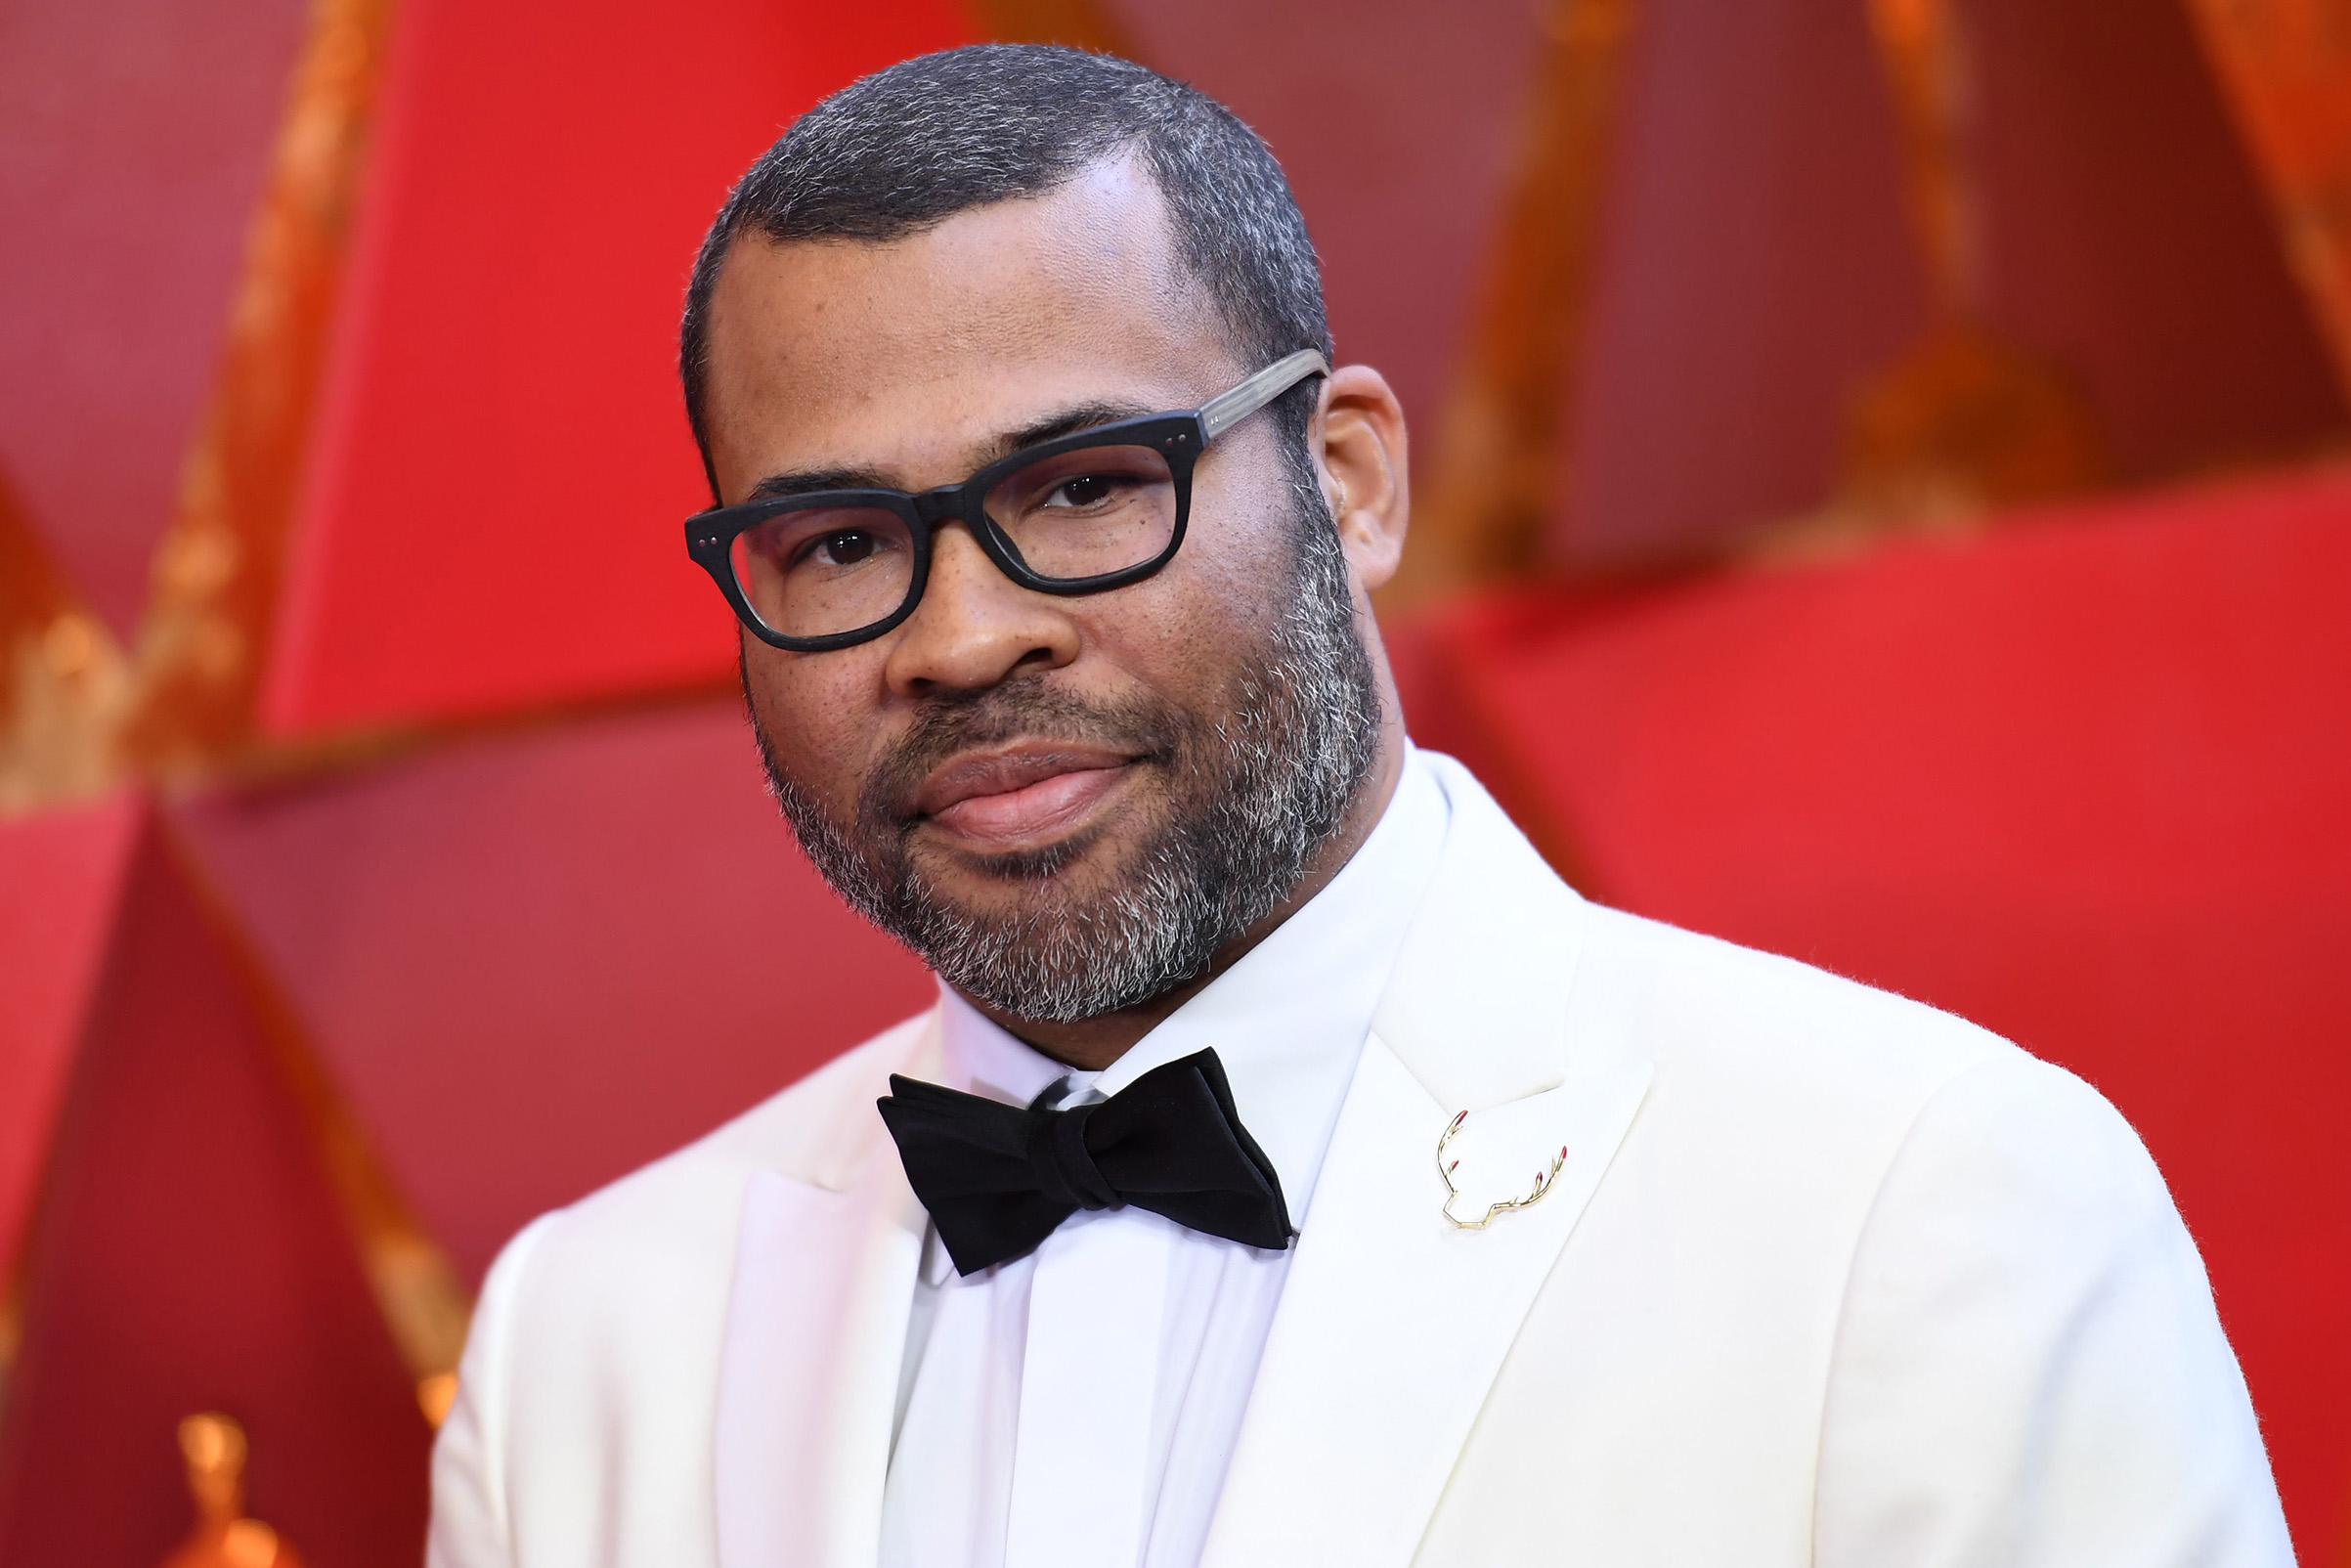 'Get Out' director Jordan Peele arrives for the 90th Annual Academy Awards in Hollywood, on March 4.